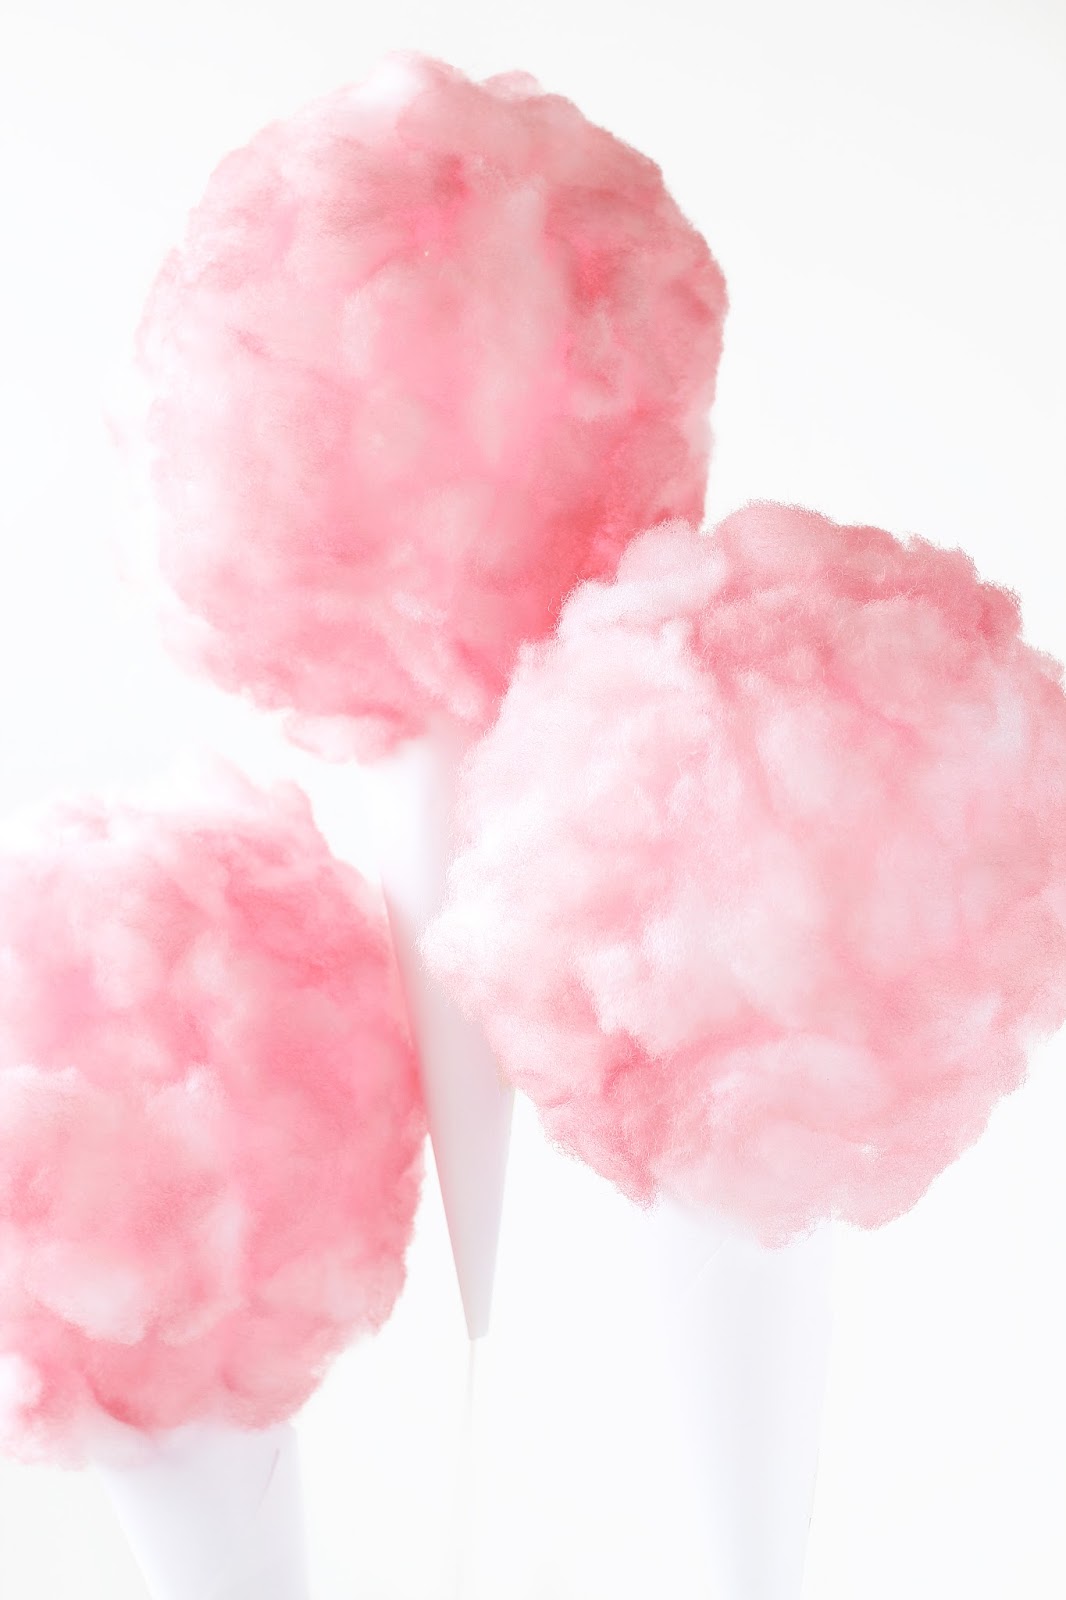 Cotton Candy Pictures 85